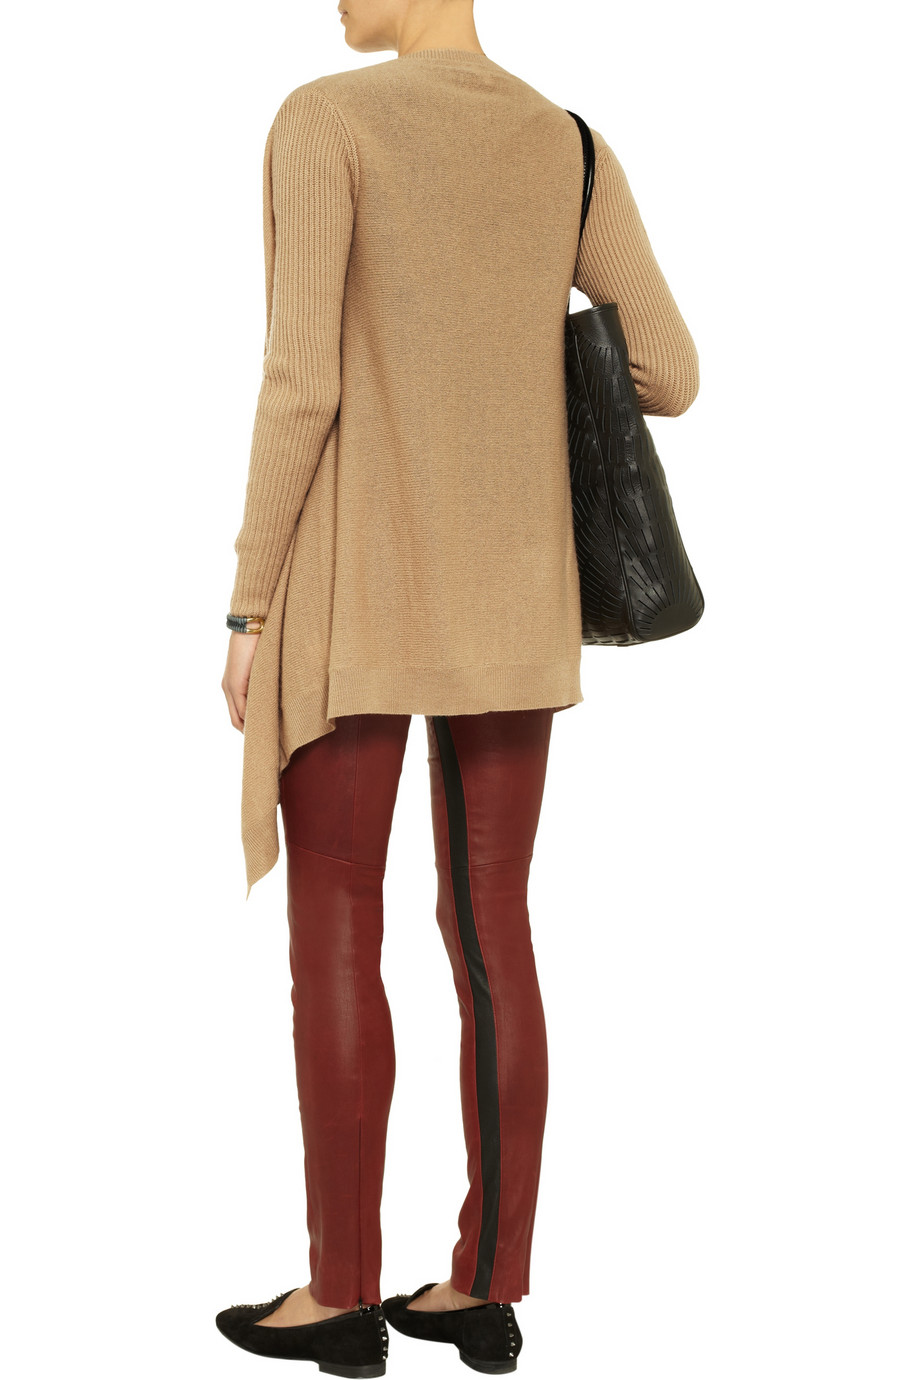 Iris & Ink Ribbedsleeve Draped Cashmere Cardigan in Camel (Natural) - Lyst